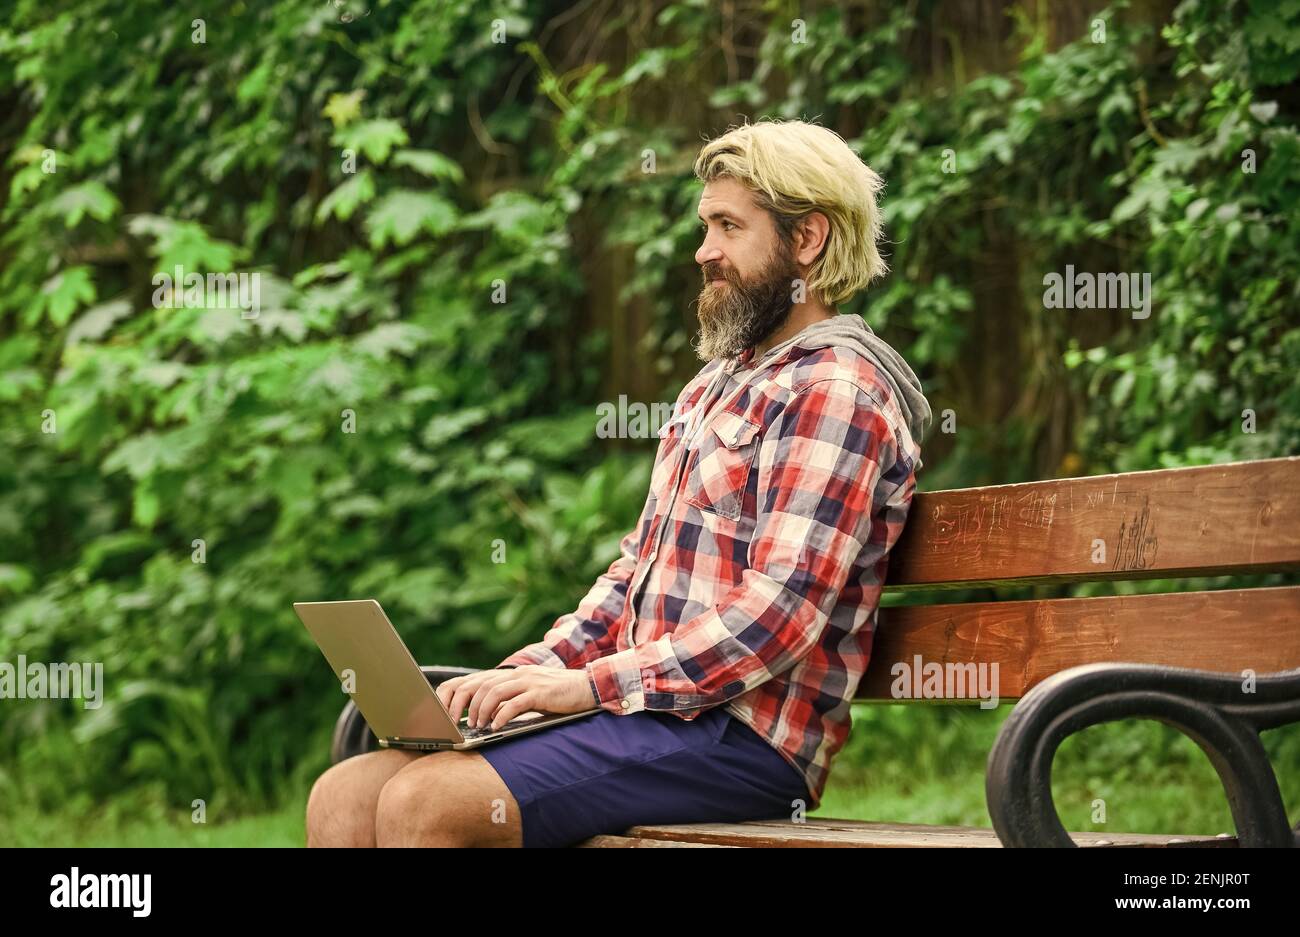 Remote job. Online shopping. Agile business. Bearded guy sit bench park nature background. Work and relax. Working online. Hipster inspired work in park. Fresh air. Mobile internet. Modern laptop. Stock Photo